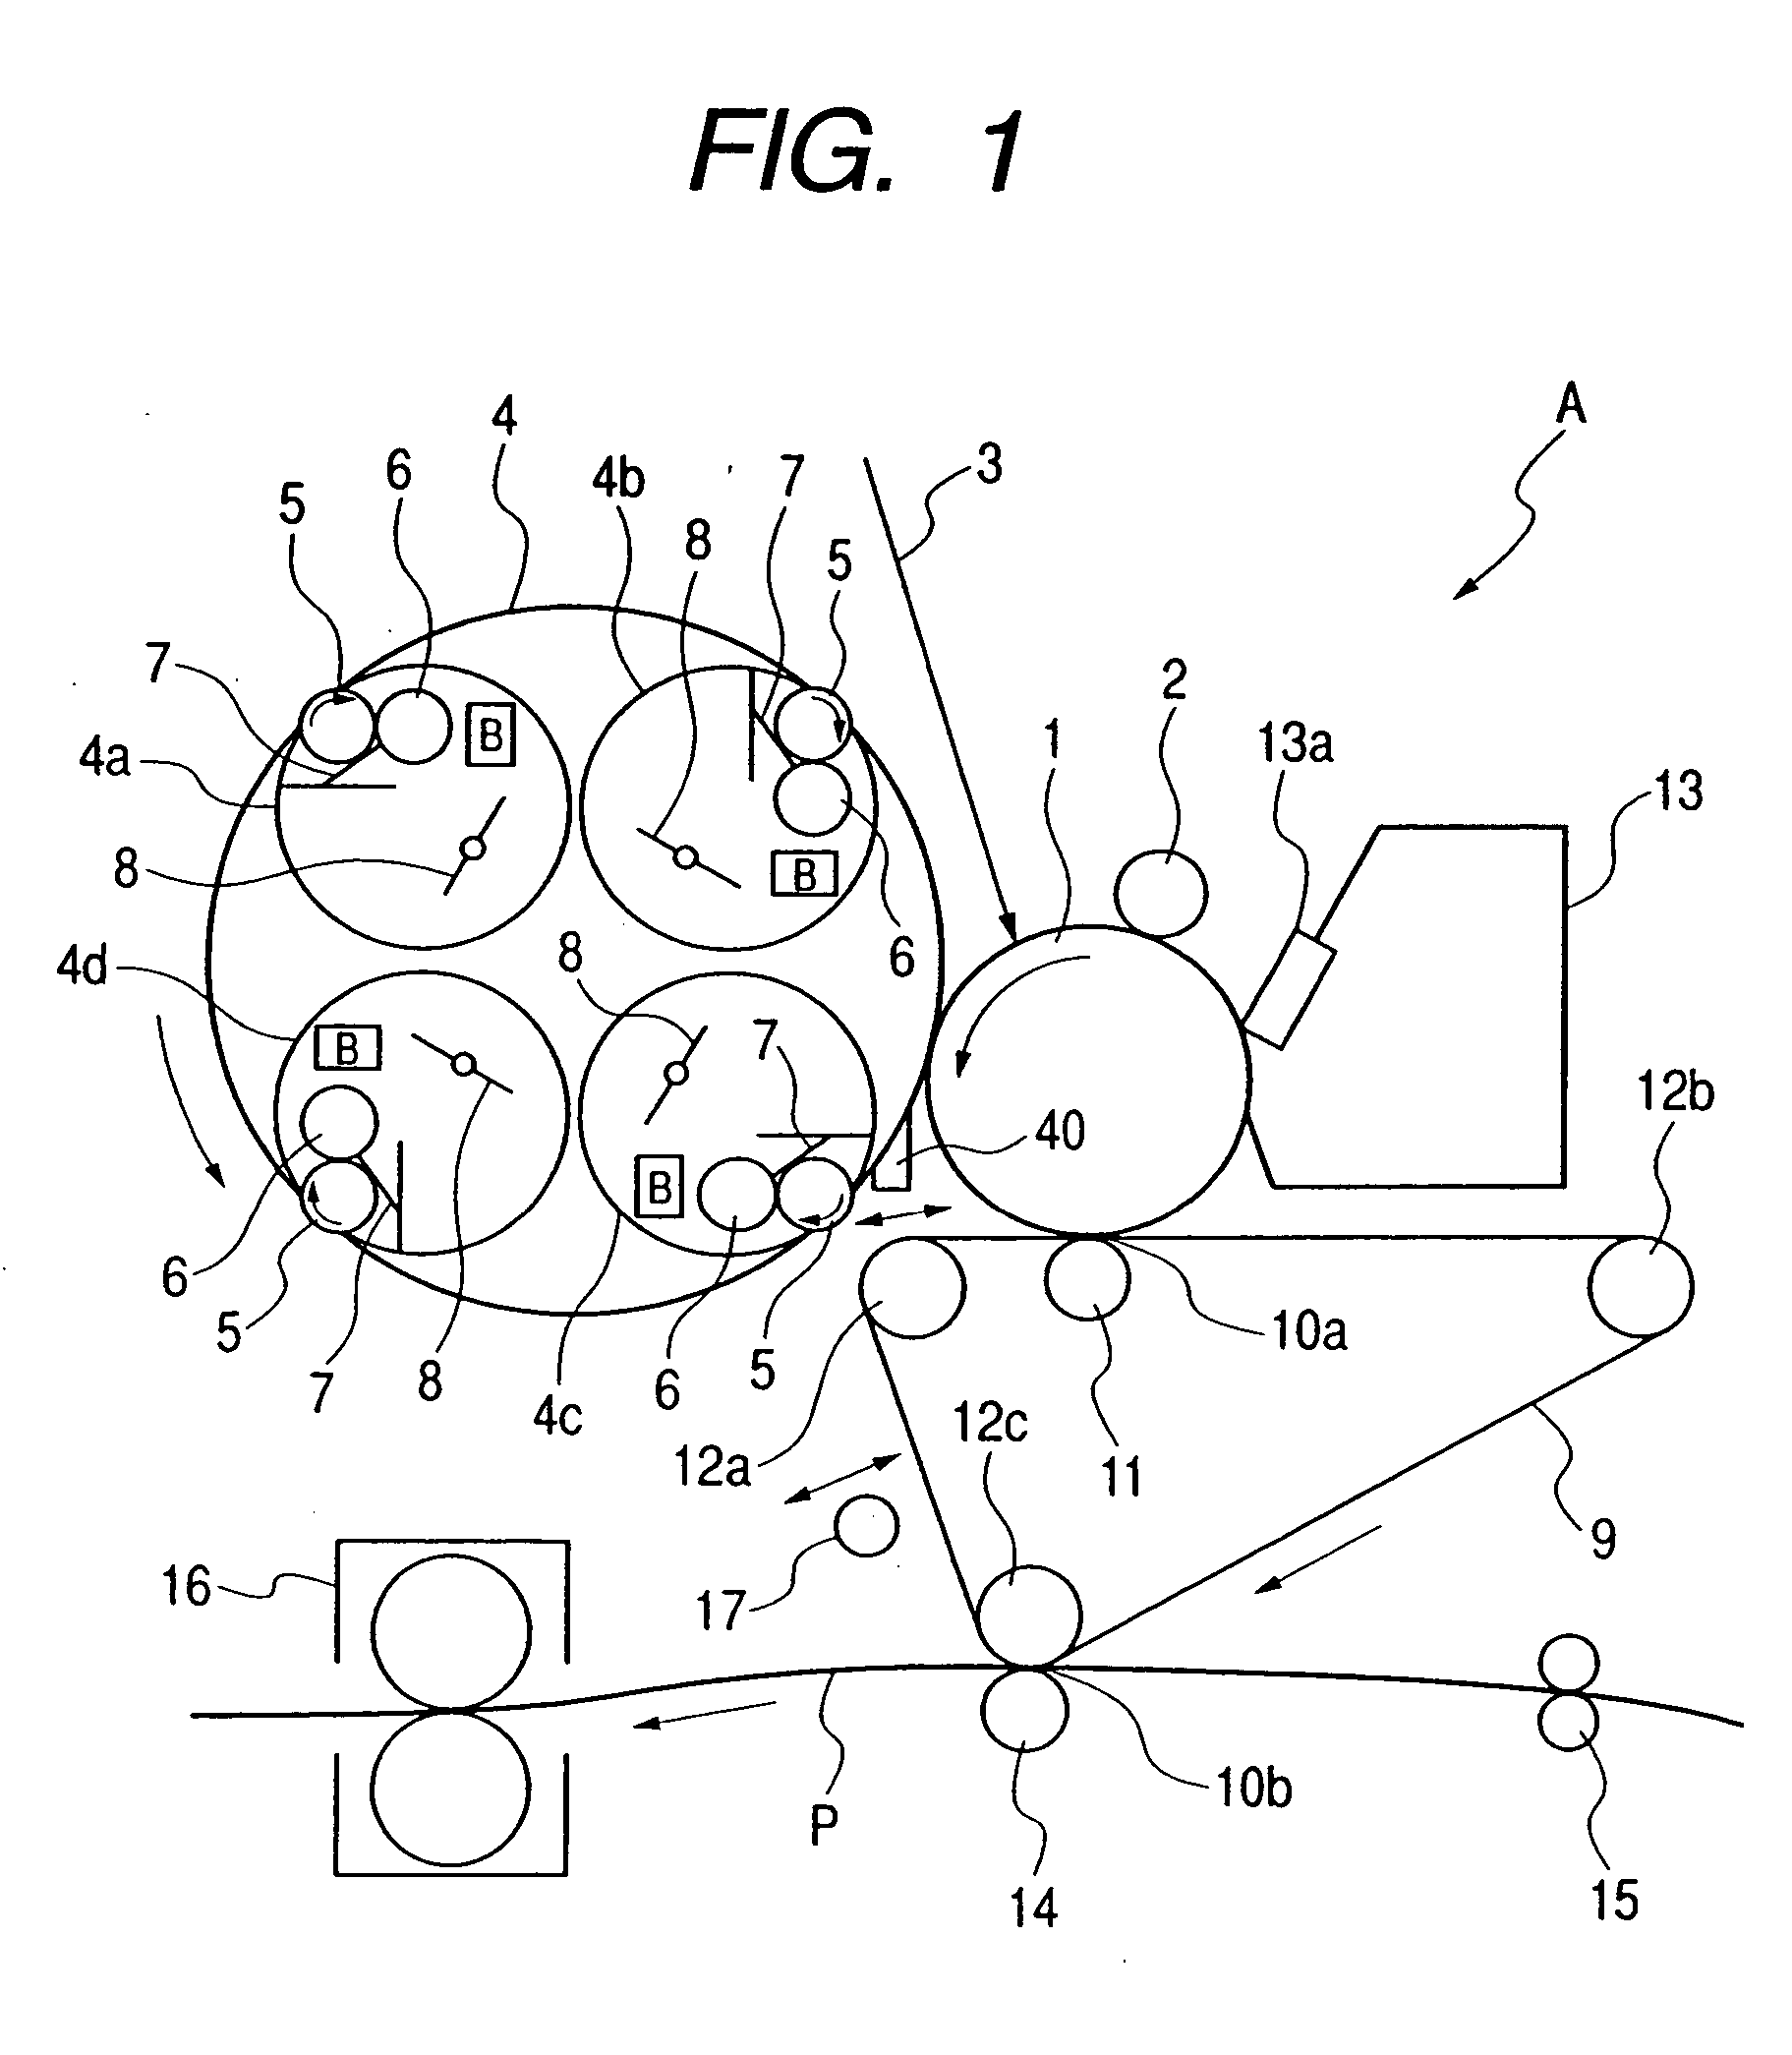 Image forming apparatus and control method for the image forming apparatus